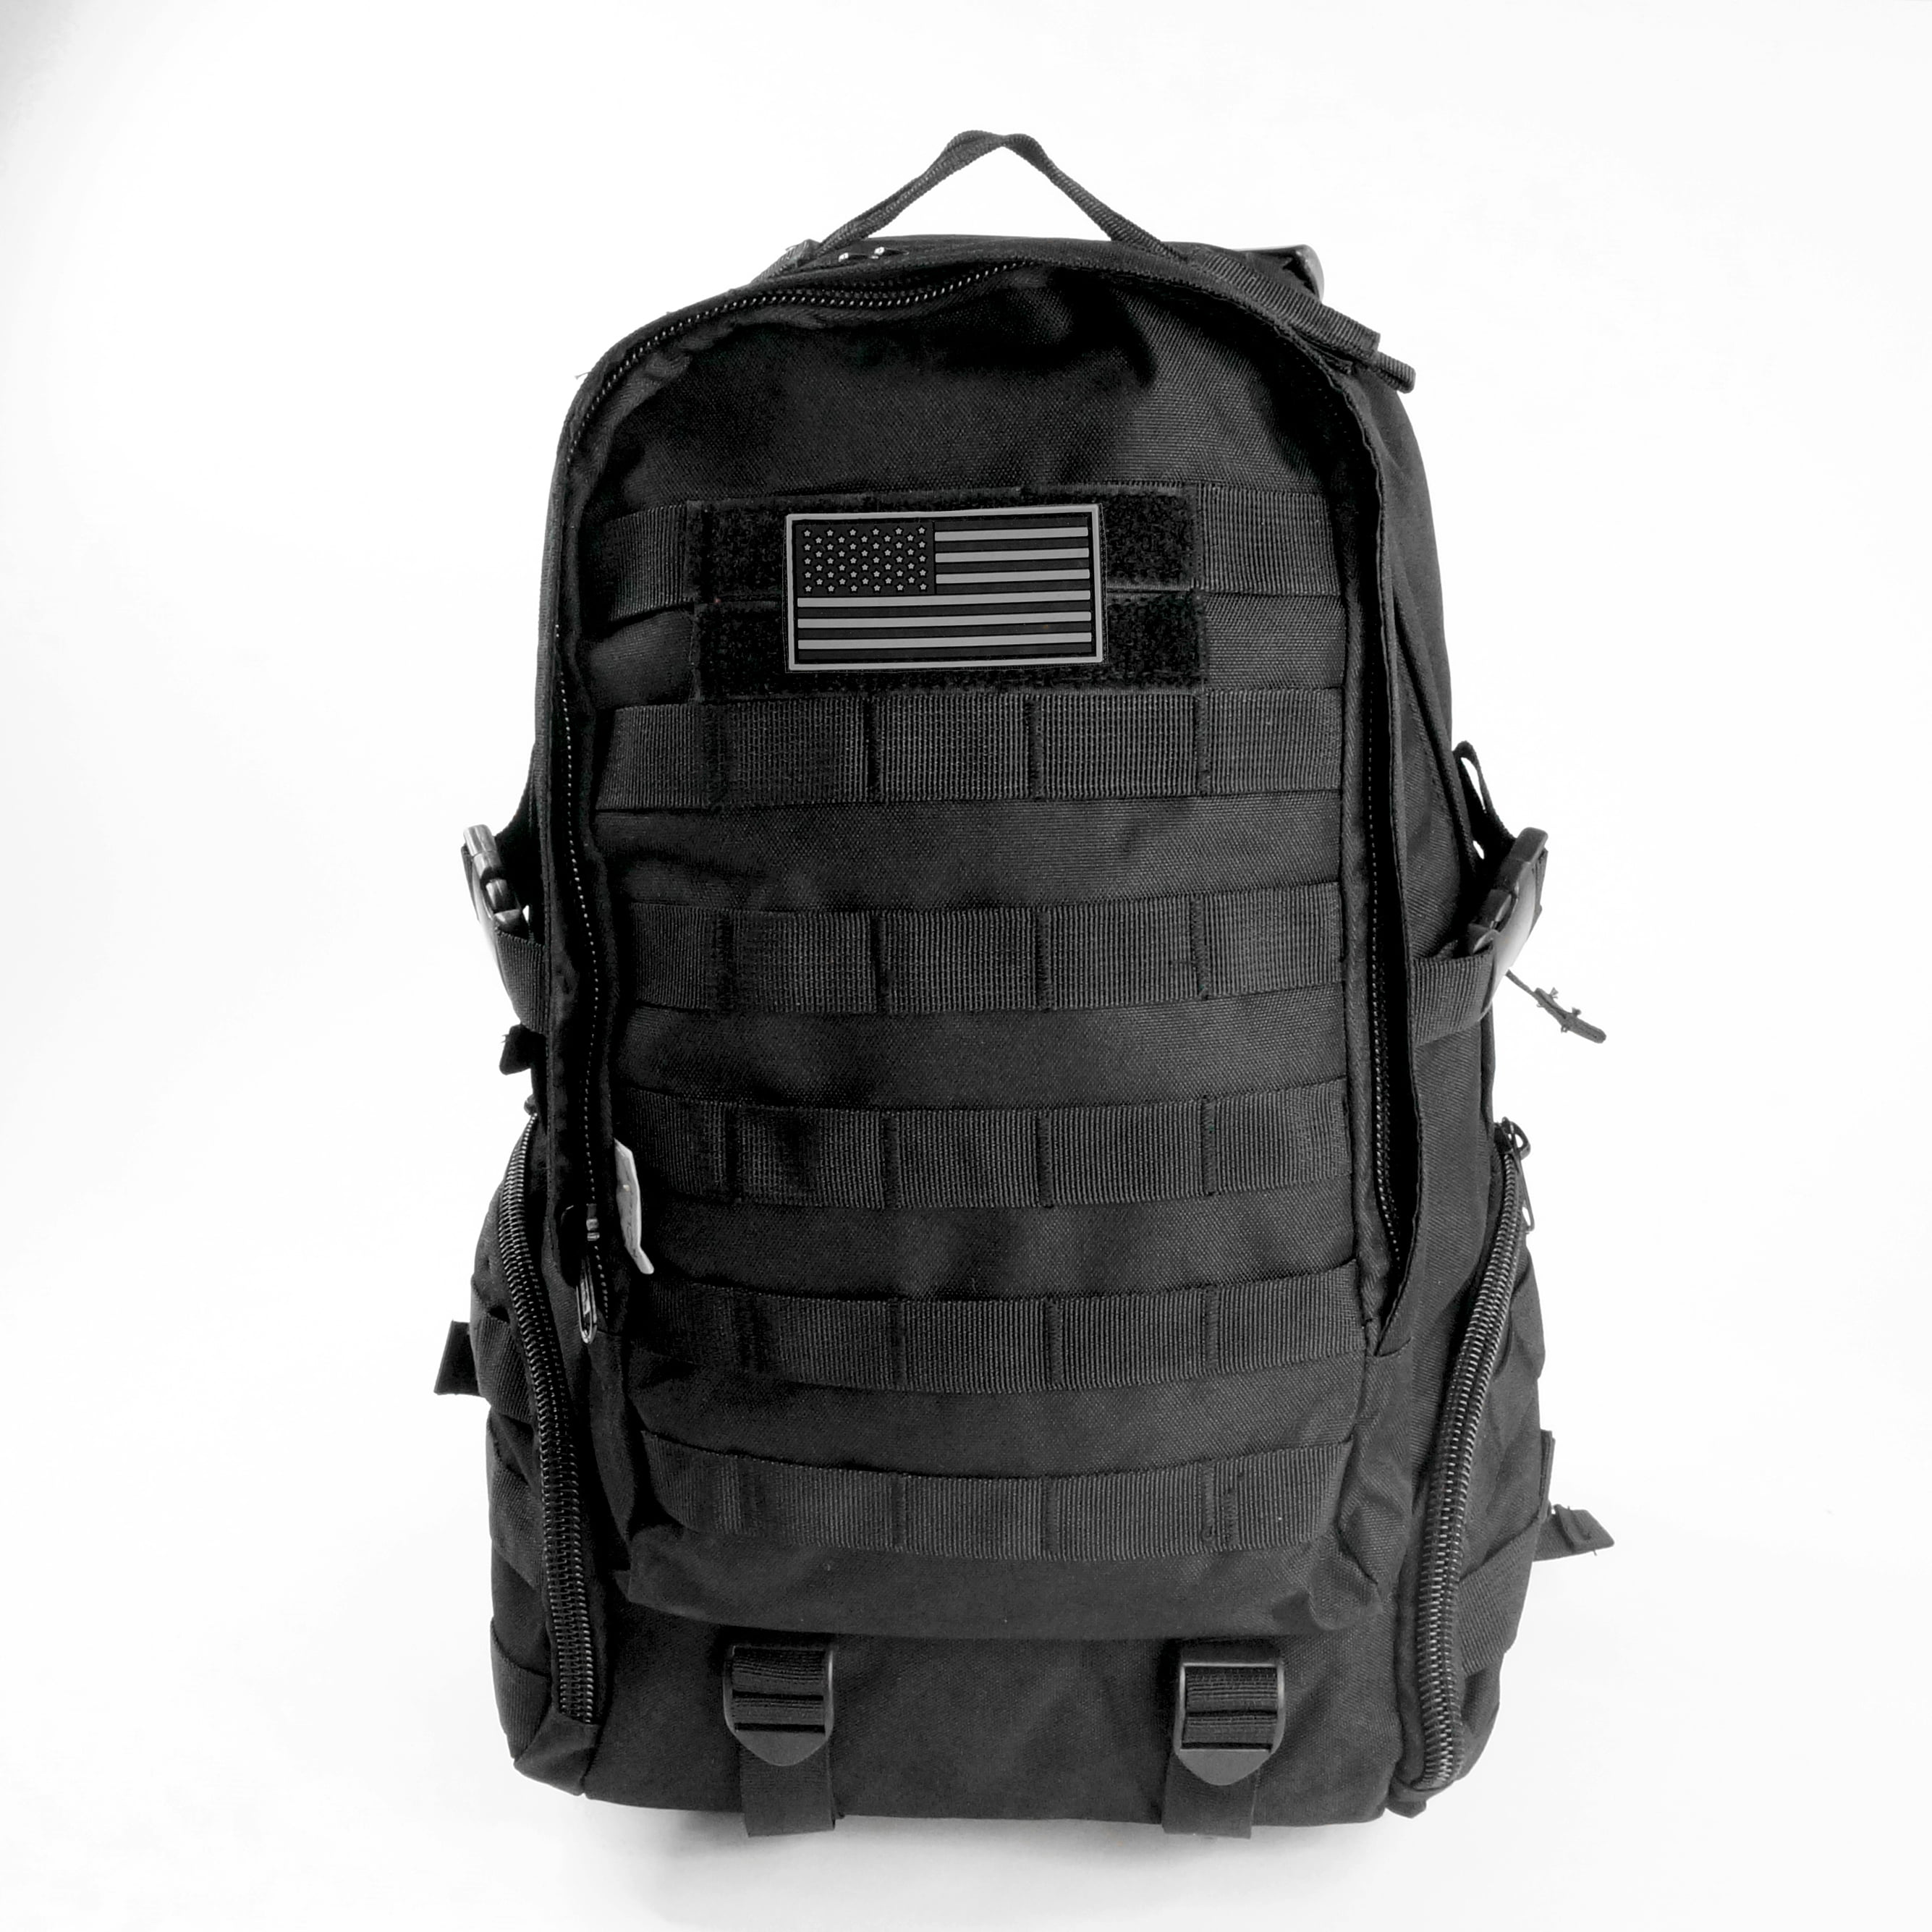 Tactical Military 25L Molle Backpack Hiking Camping Trekking Travel school Bag 